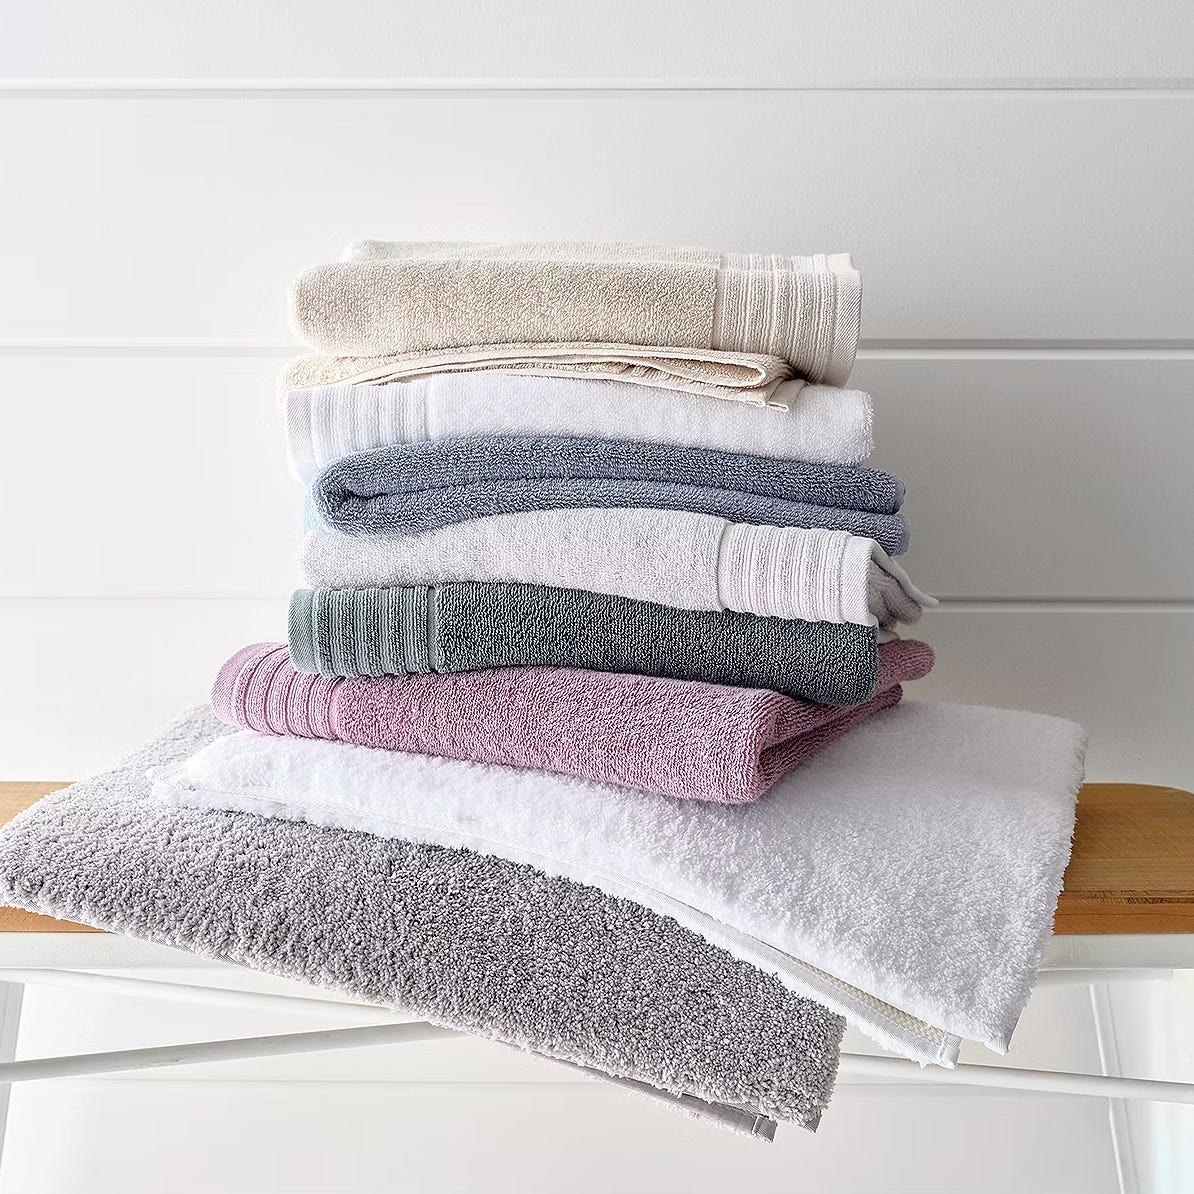 A stack of folded towels in various colors, including beige, white, blue, green, pink, and gray, arranged on a shelf.